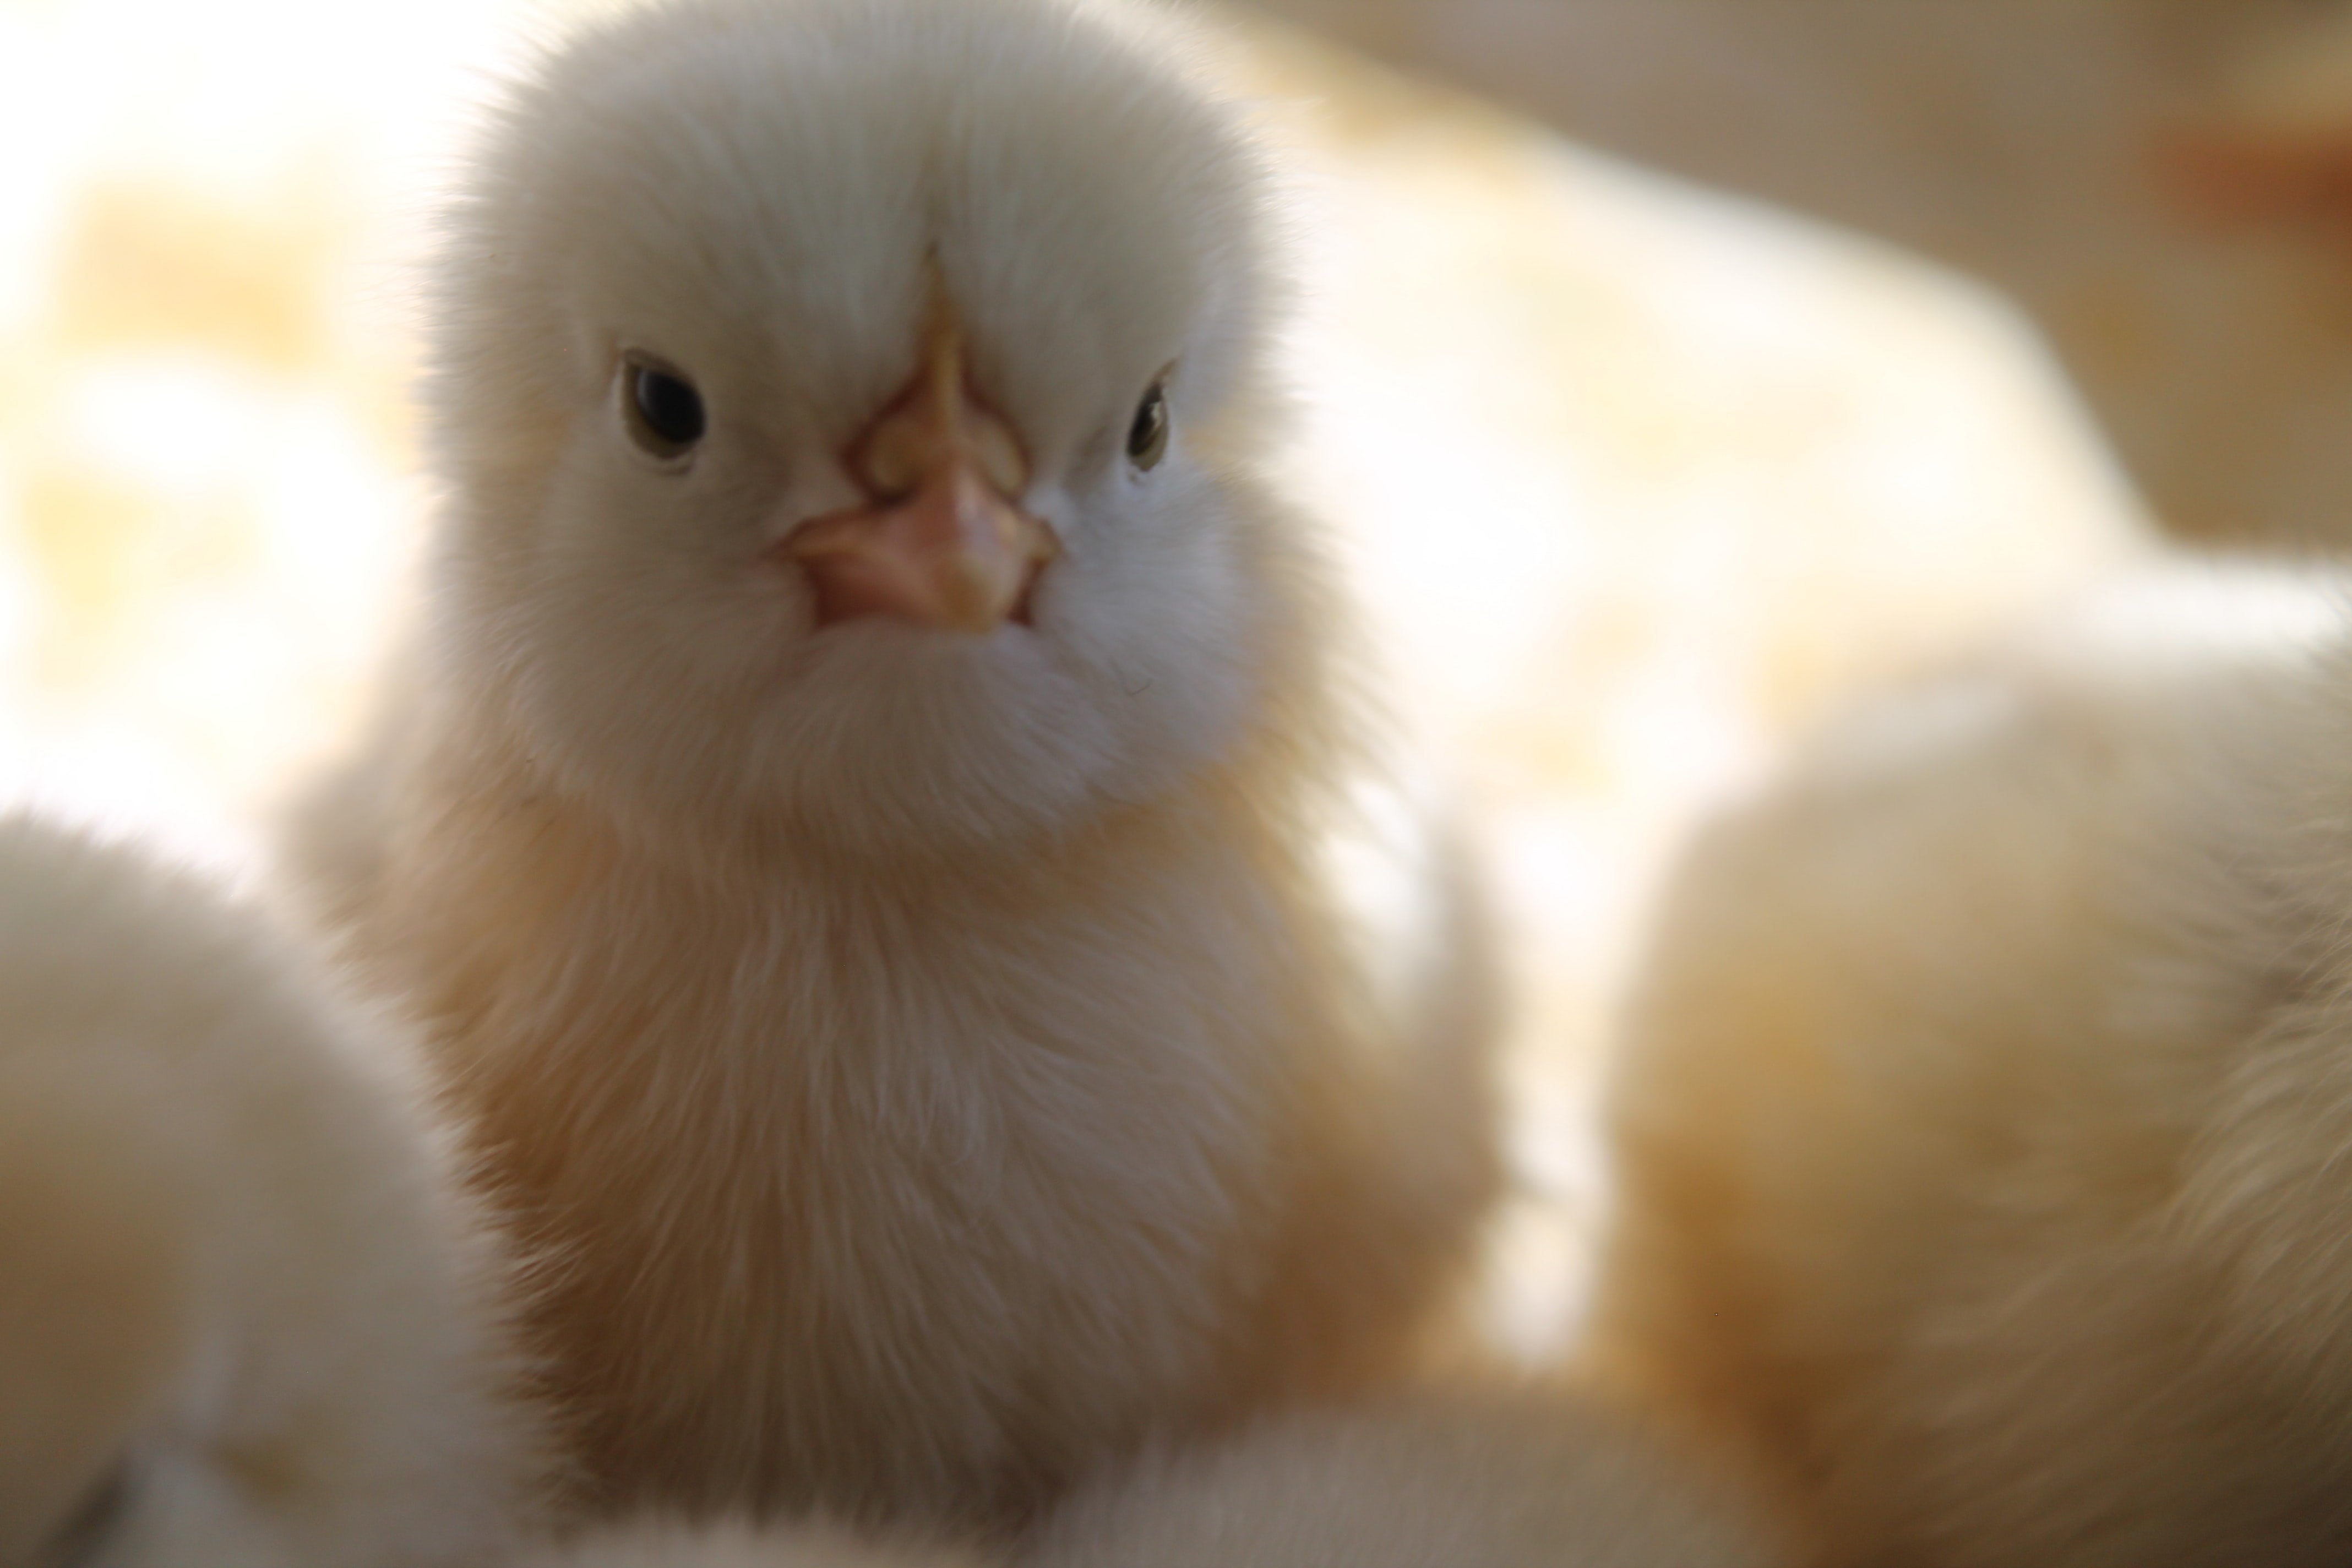 A baby chick, surrounded by other chicks, looks straight at the camera.